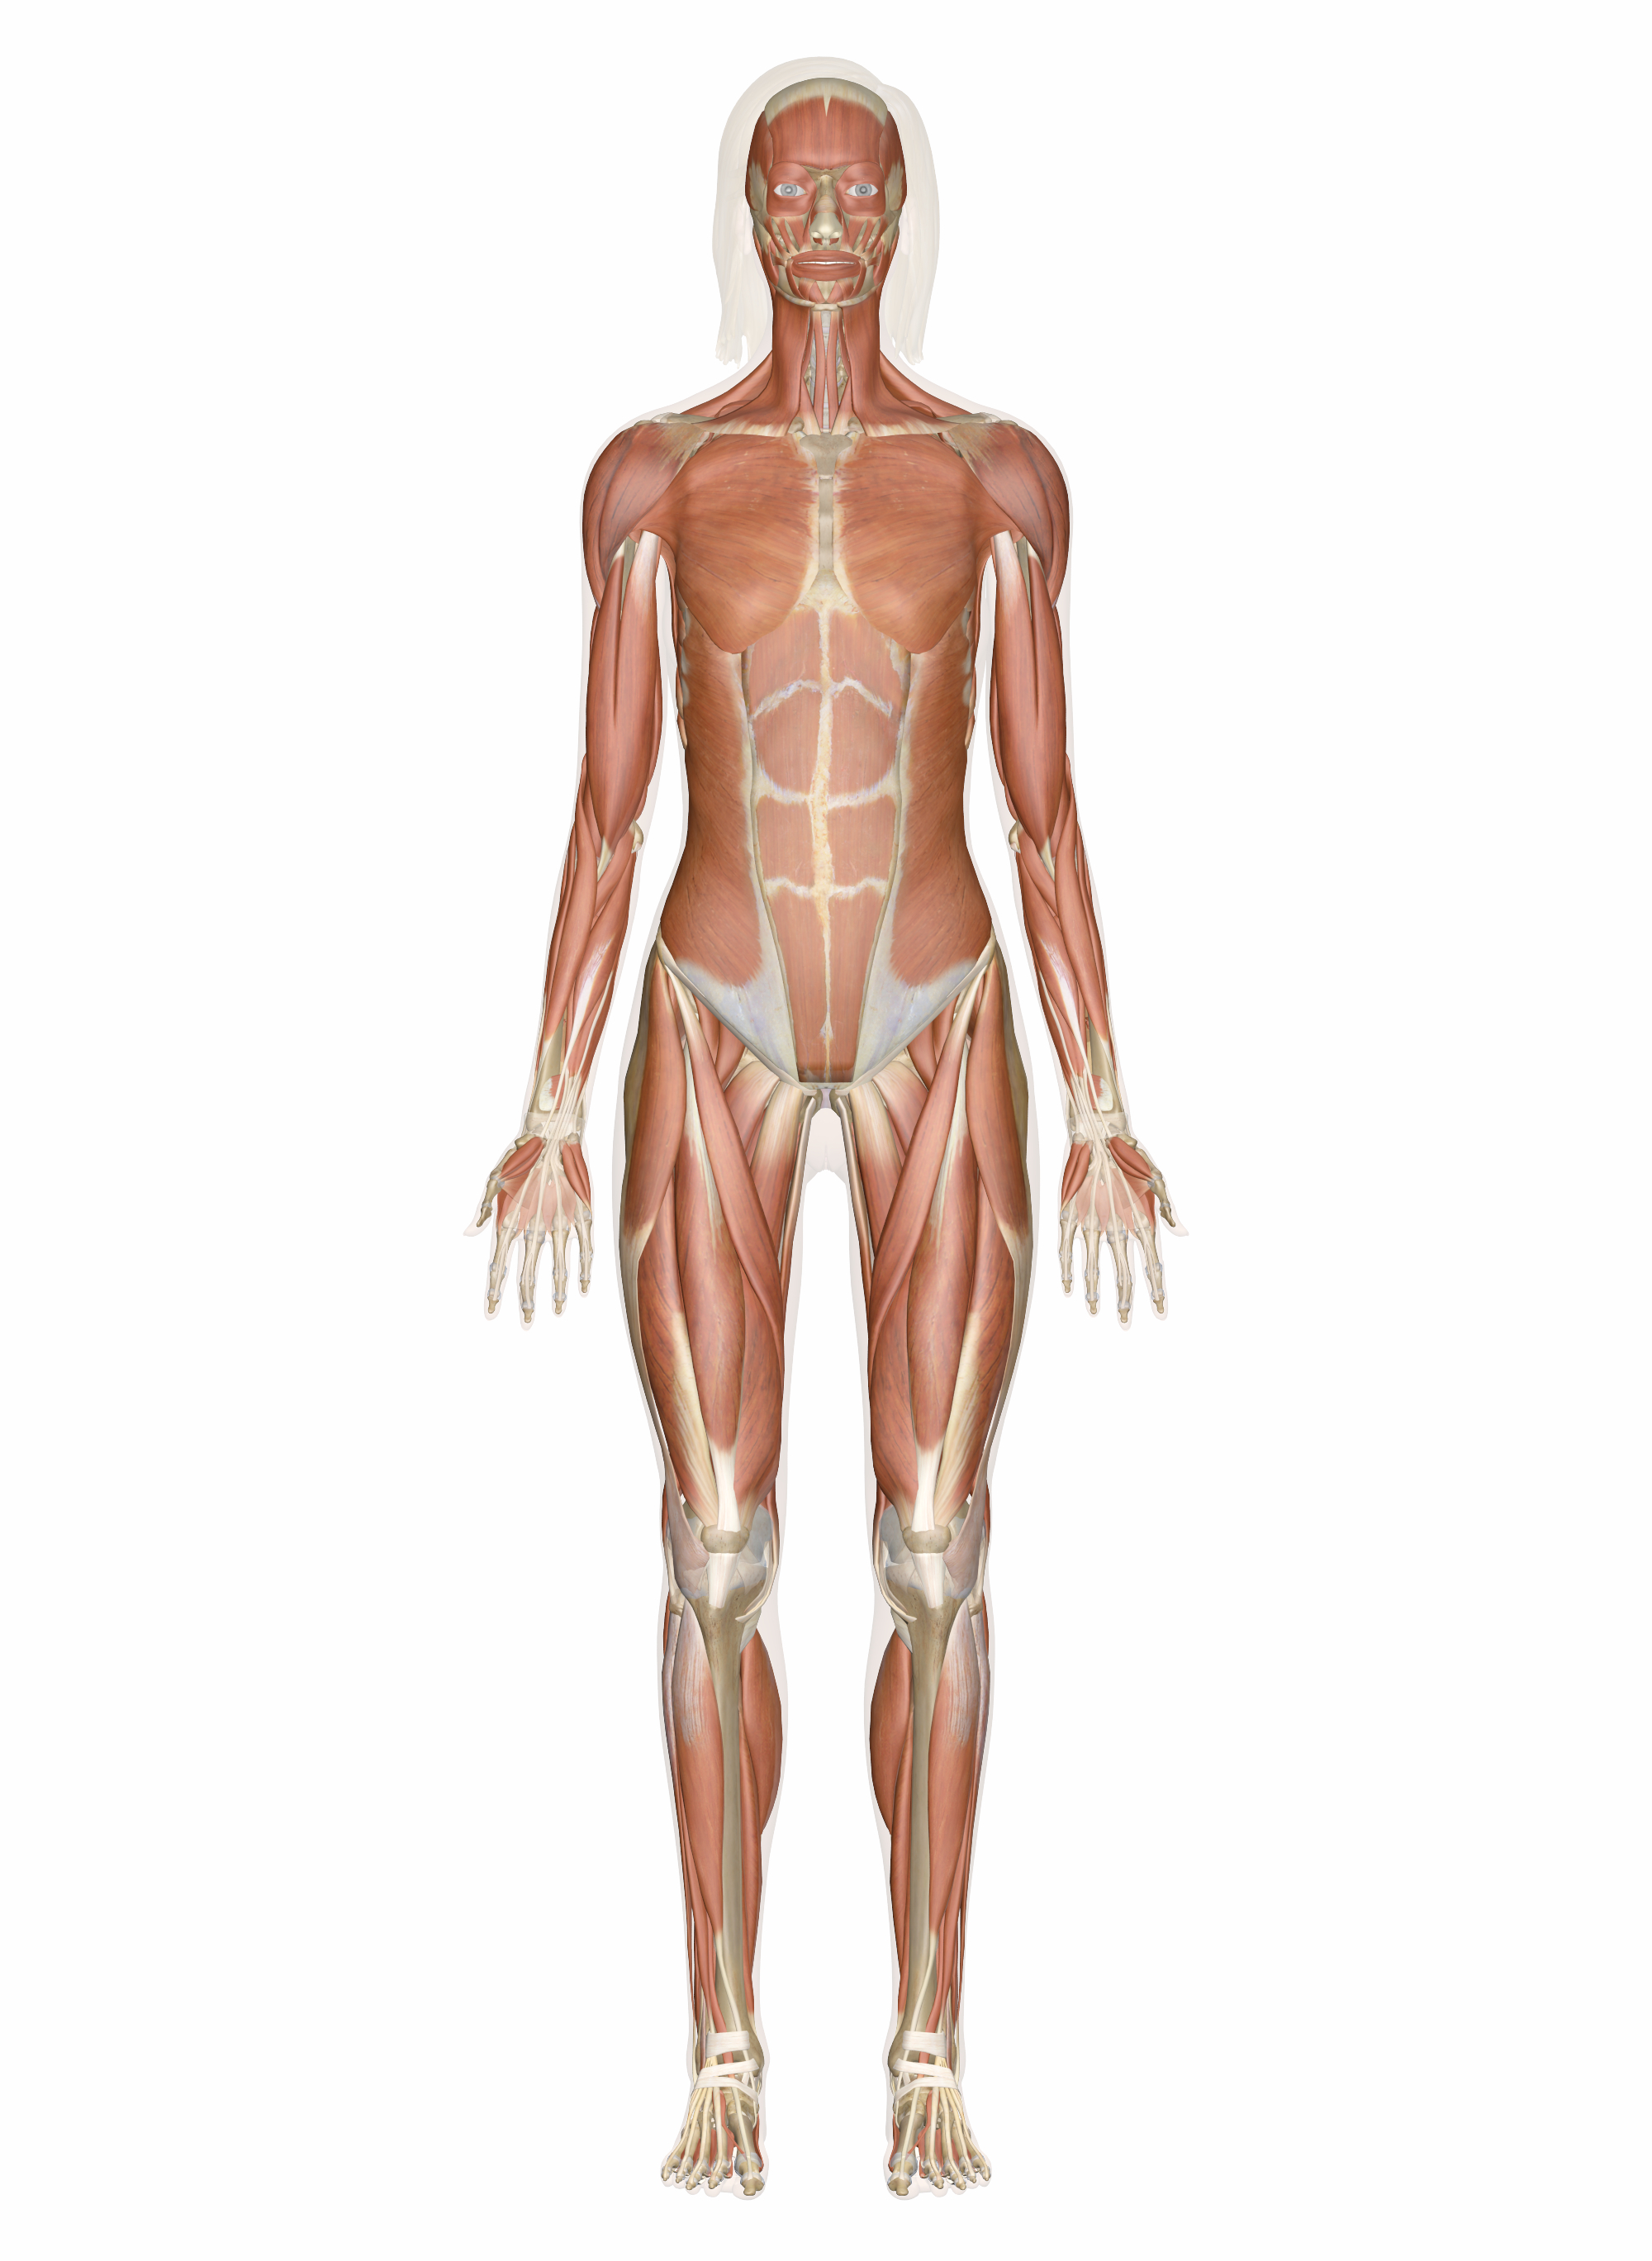 Back Muscle Diagram Muscular System Muscles Of The Human Body